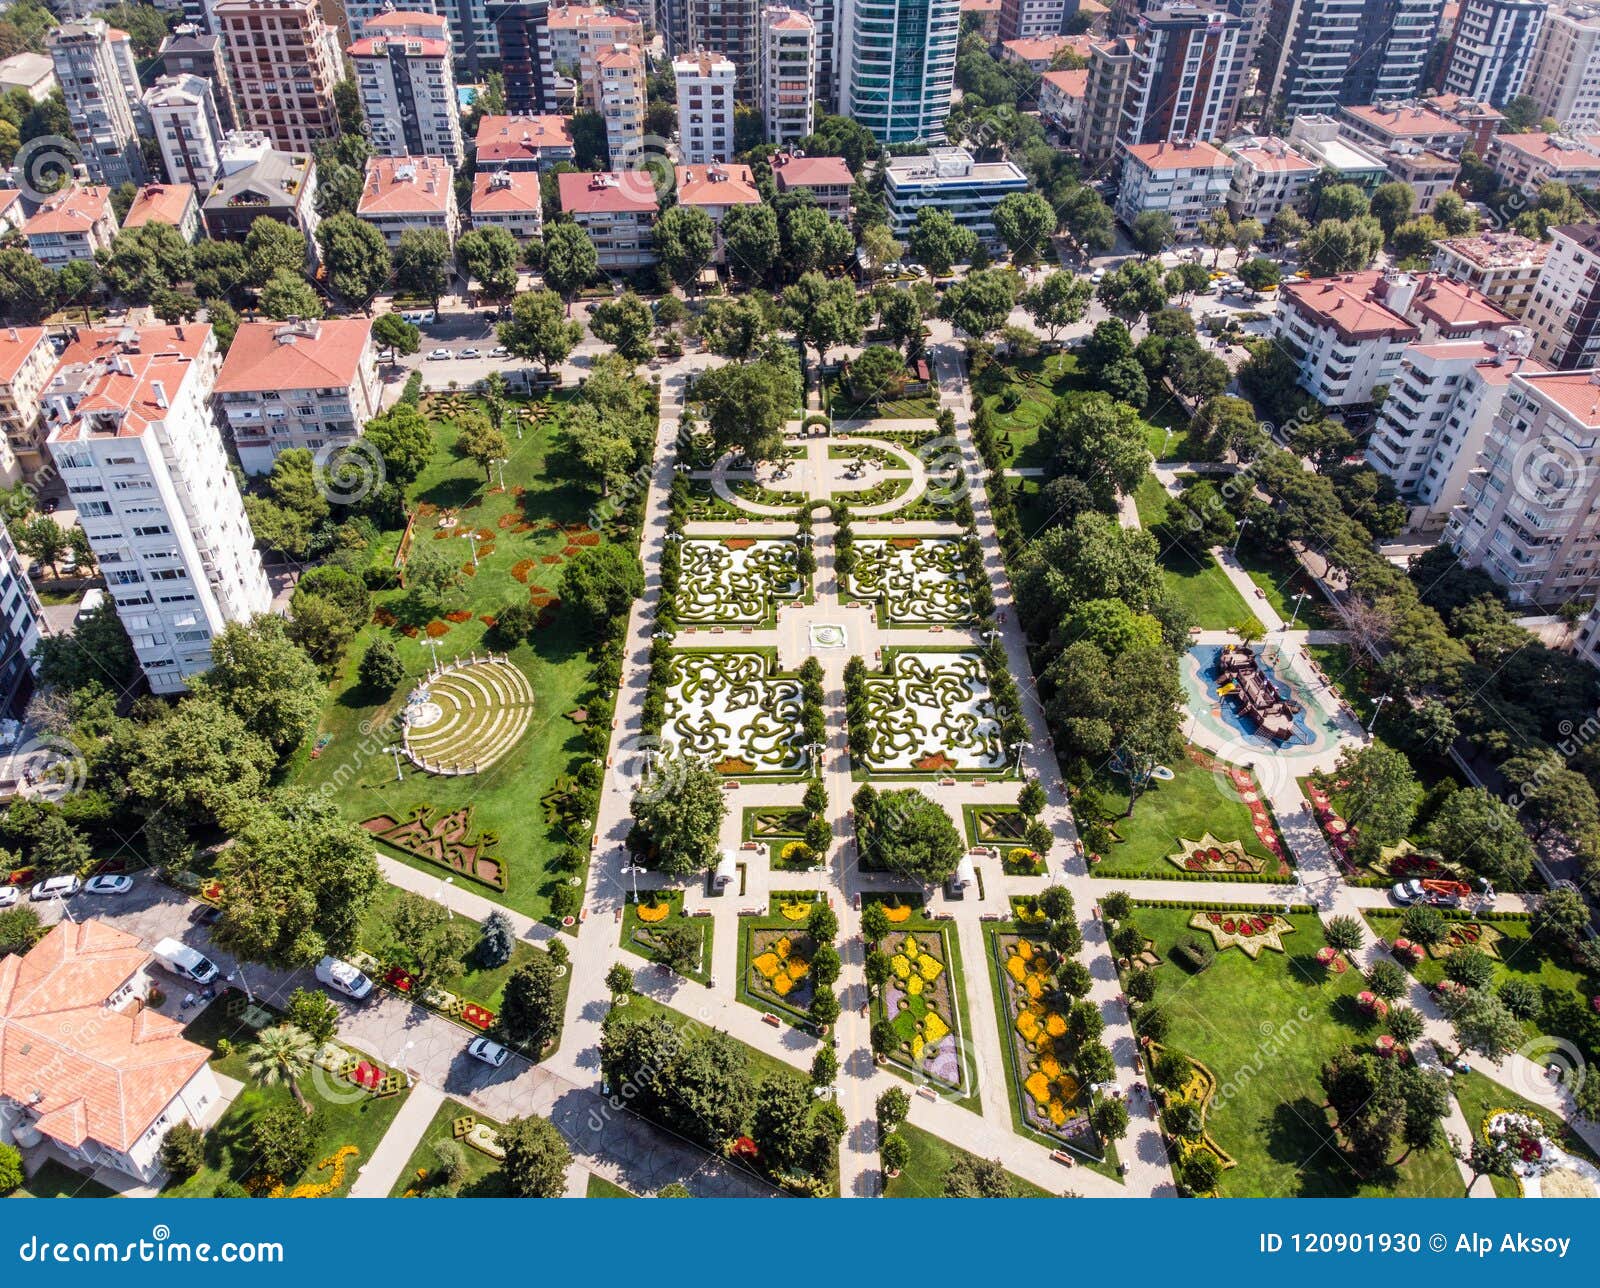 aerial drone view of goztepe 60th year park located in kadikoy, istanbul.